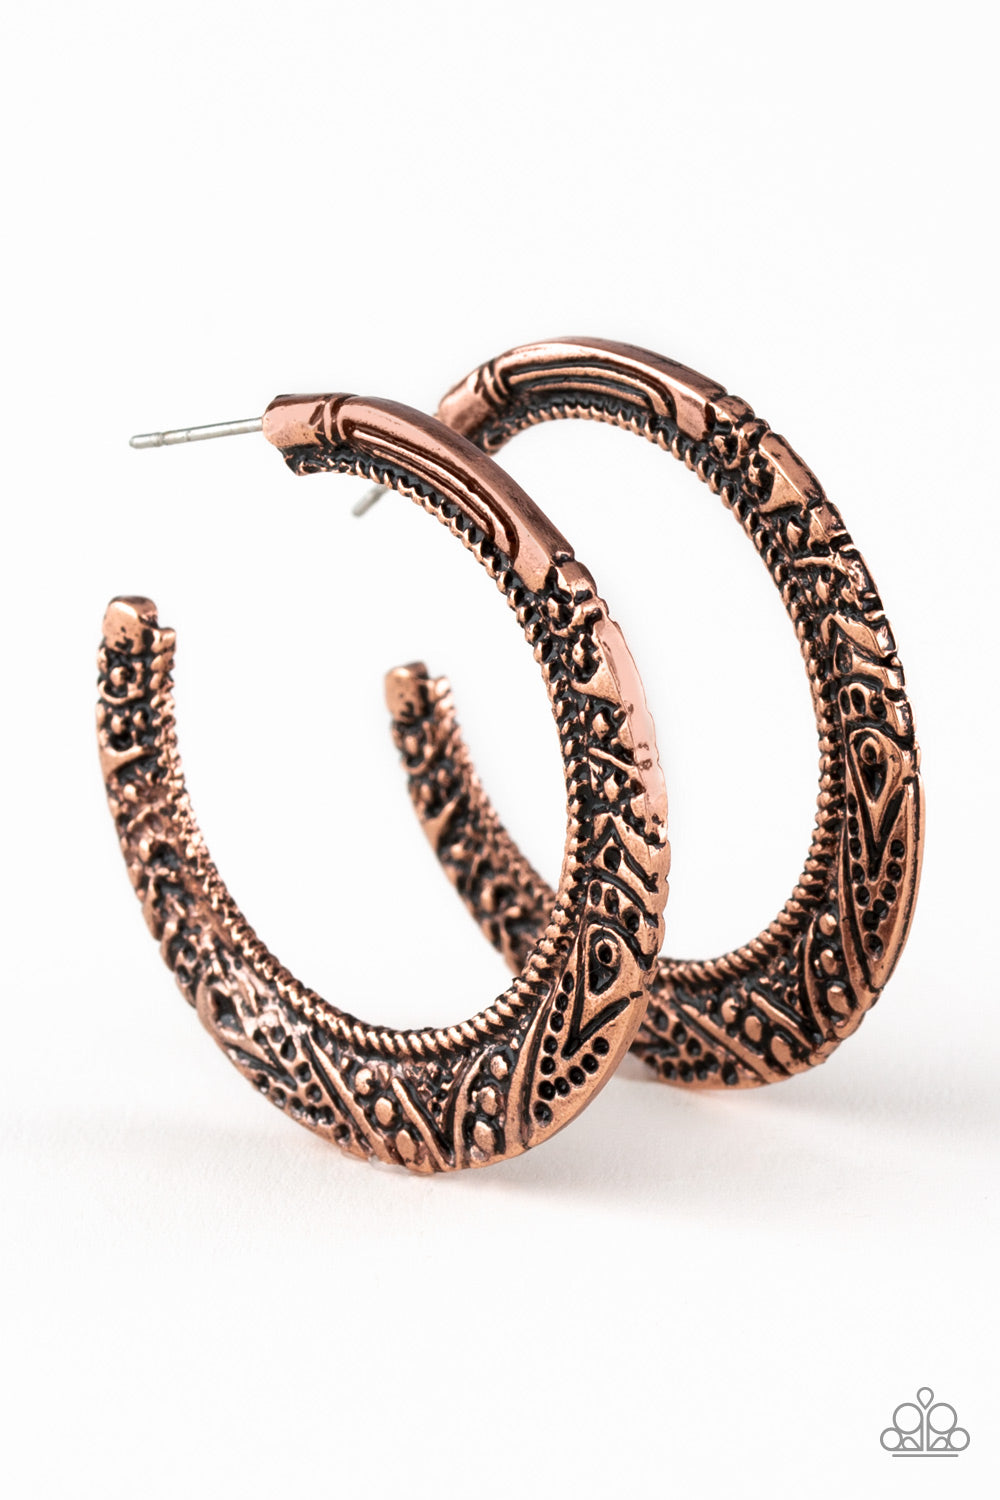 Stamped in tribal inspired patterns, a flattened copper bar curls around the ear for a seasonal look. Earring attaches to a standard post fitting. Hoop measures 1 1/2